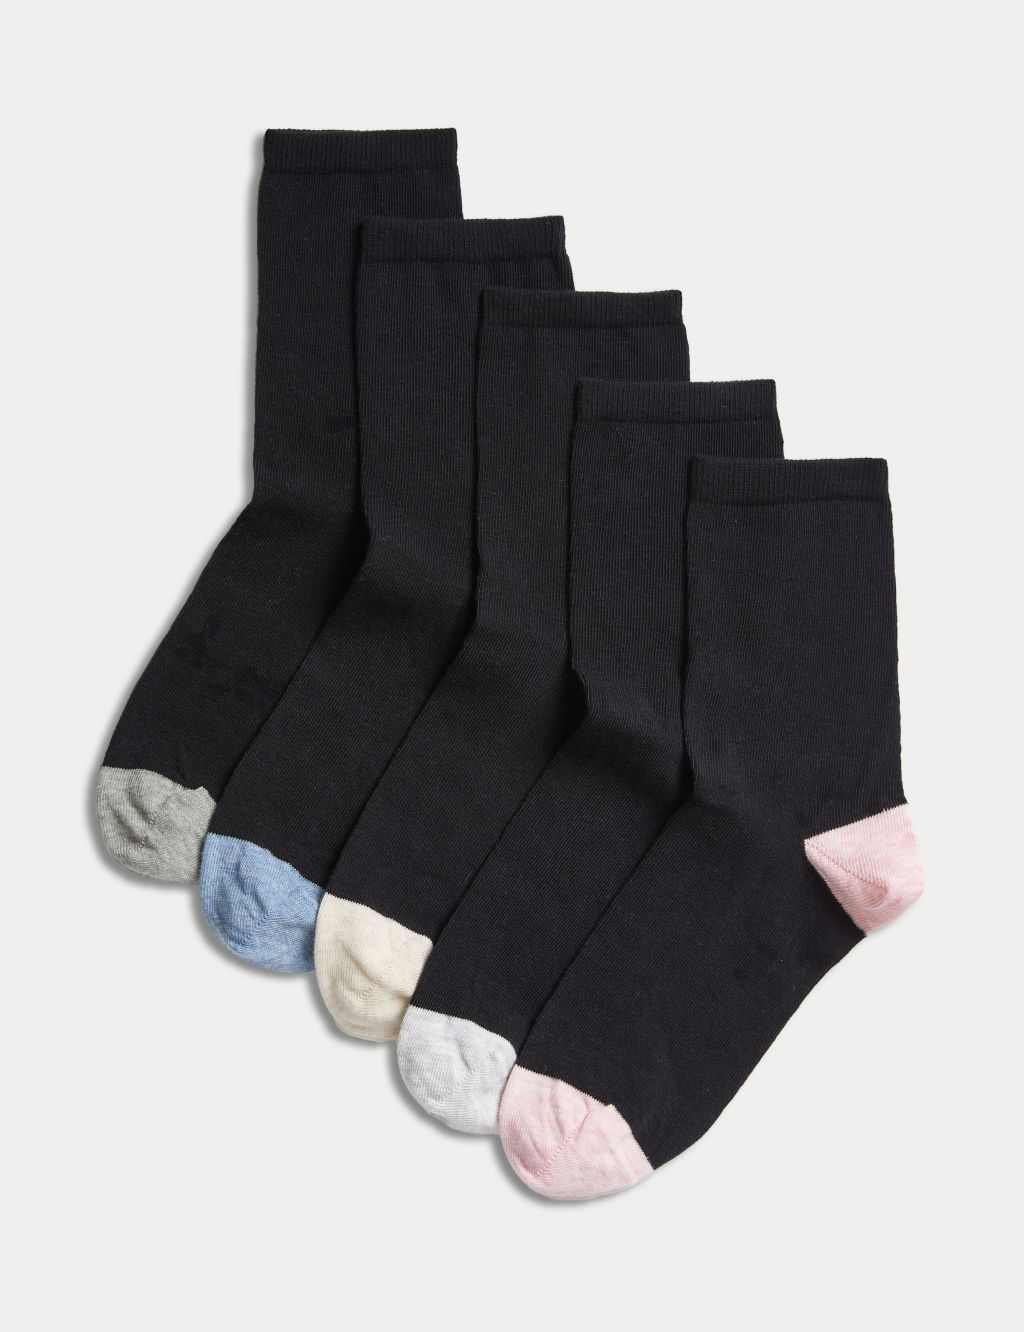 5pk Cotton Rich Seamless Toes Ankle High Socks image 1